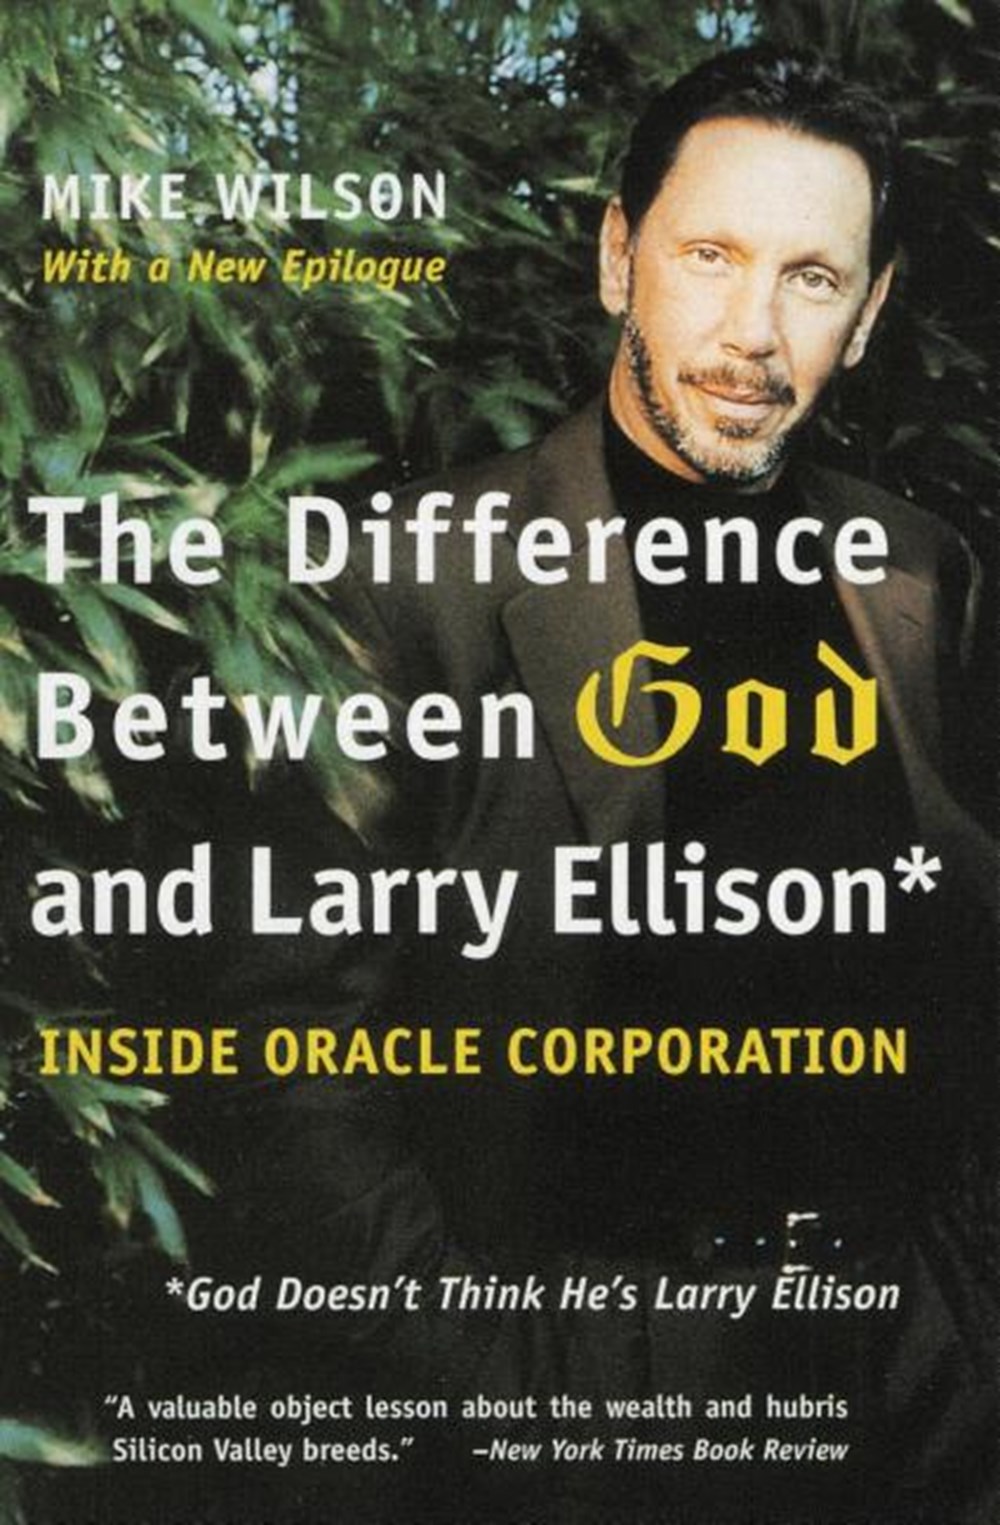 Difference Between God and Larry Ellison: *God Doesn't Think He's Larry Ellison